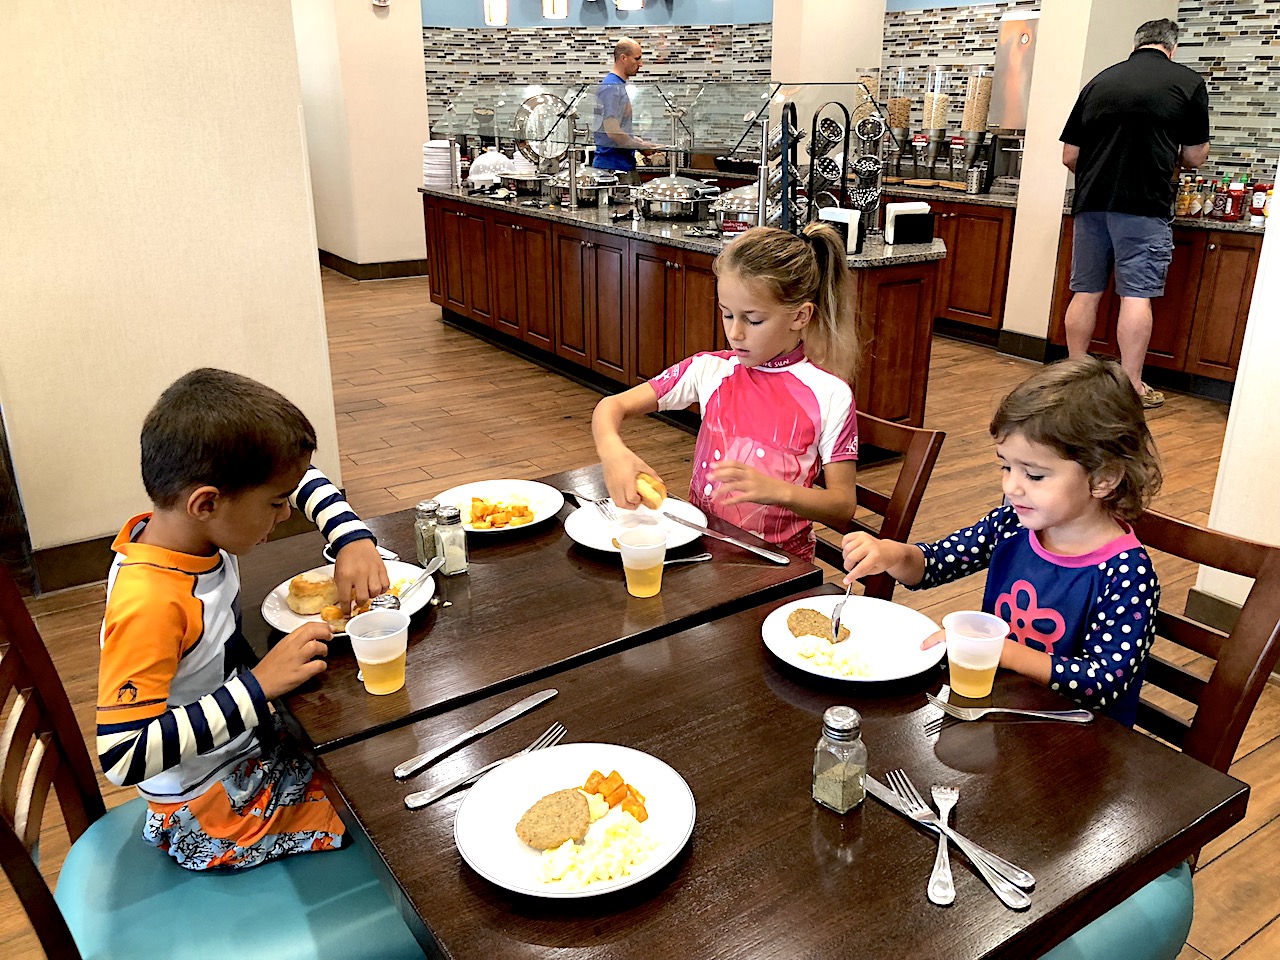 Drury Inn and Suites Gainesville Breakfast - 2-day itinerary for families in Gainesville, FL #gainesville #florida #tourofflorida #alachuacounty #gainesvilleFL #universityofflorida #UF #gogators #Gainesvillewithkids #gainesvilleitinerary 